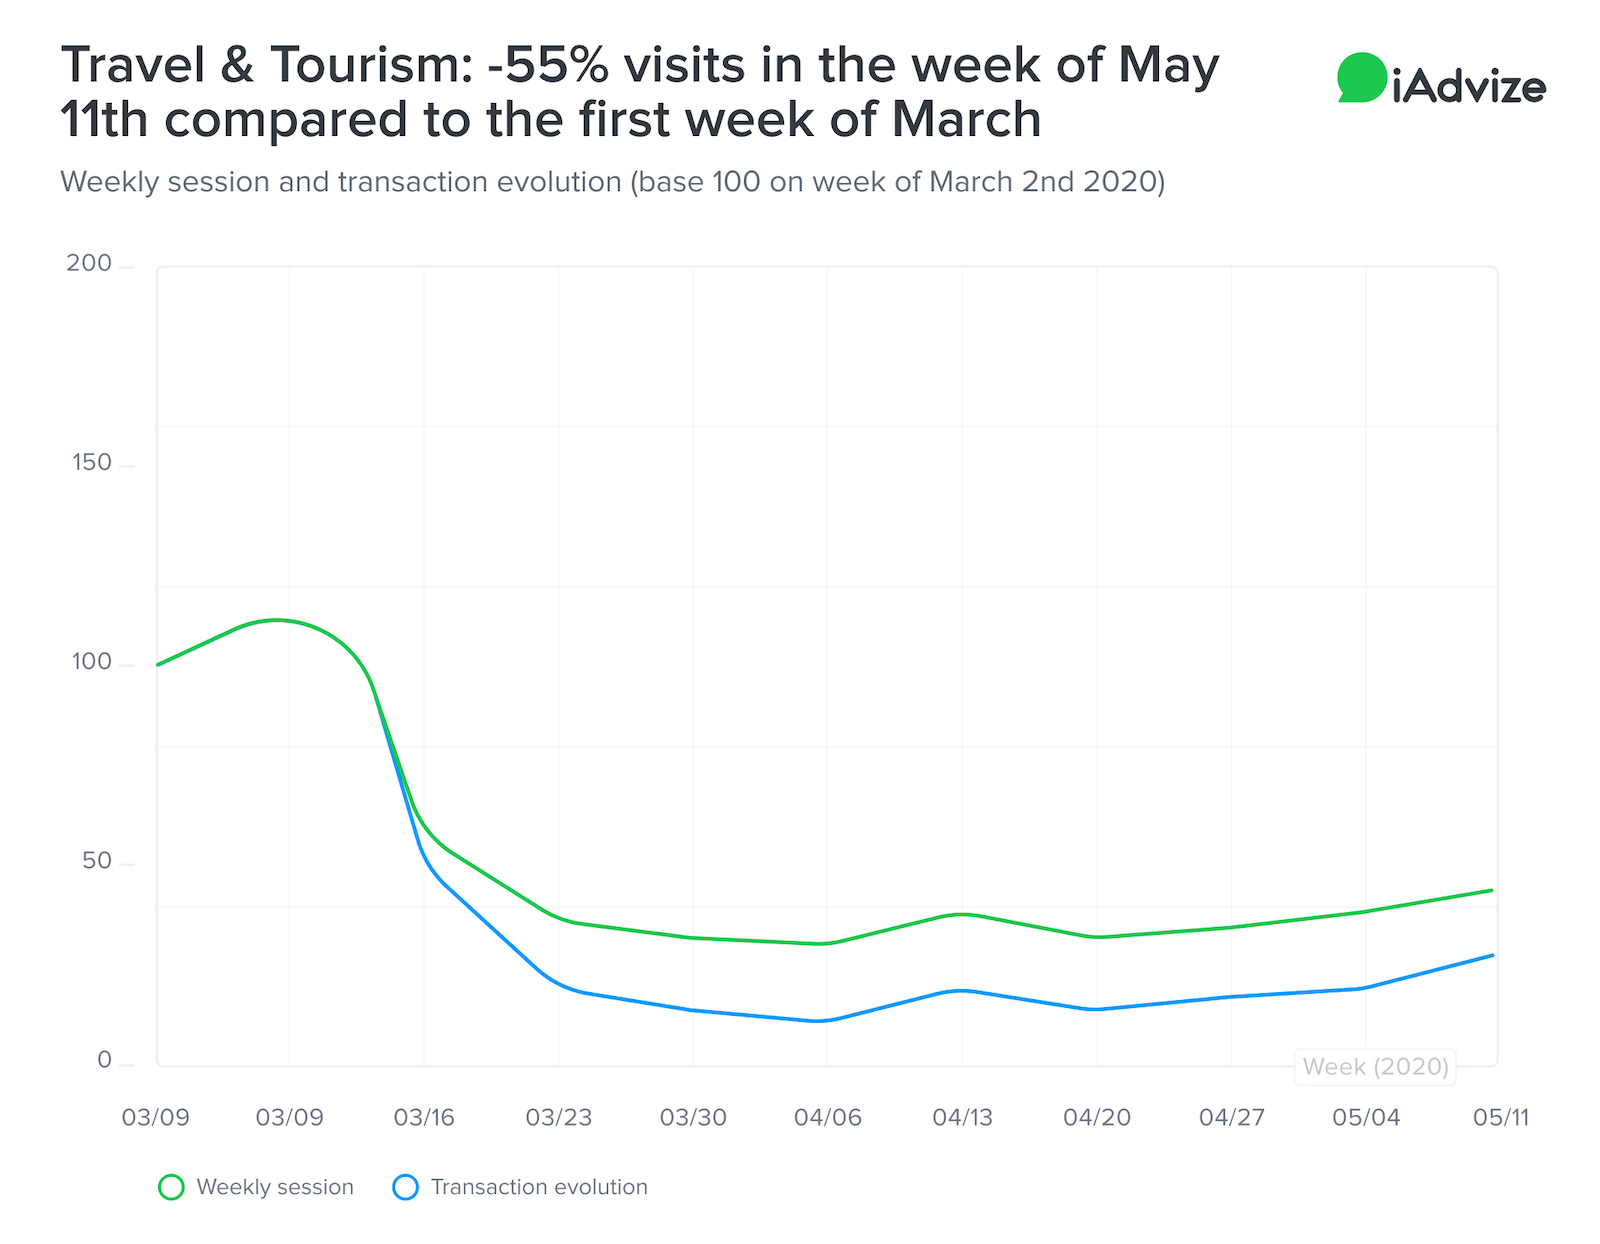 Travel & Tourism website visits decrease from May - March 2020